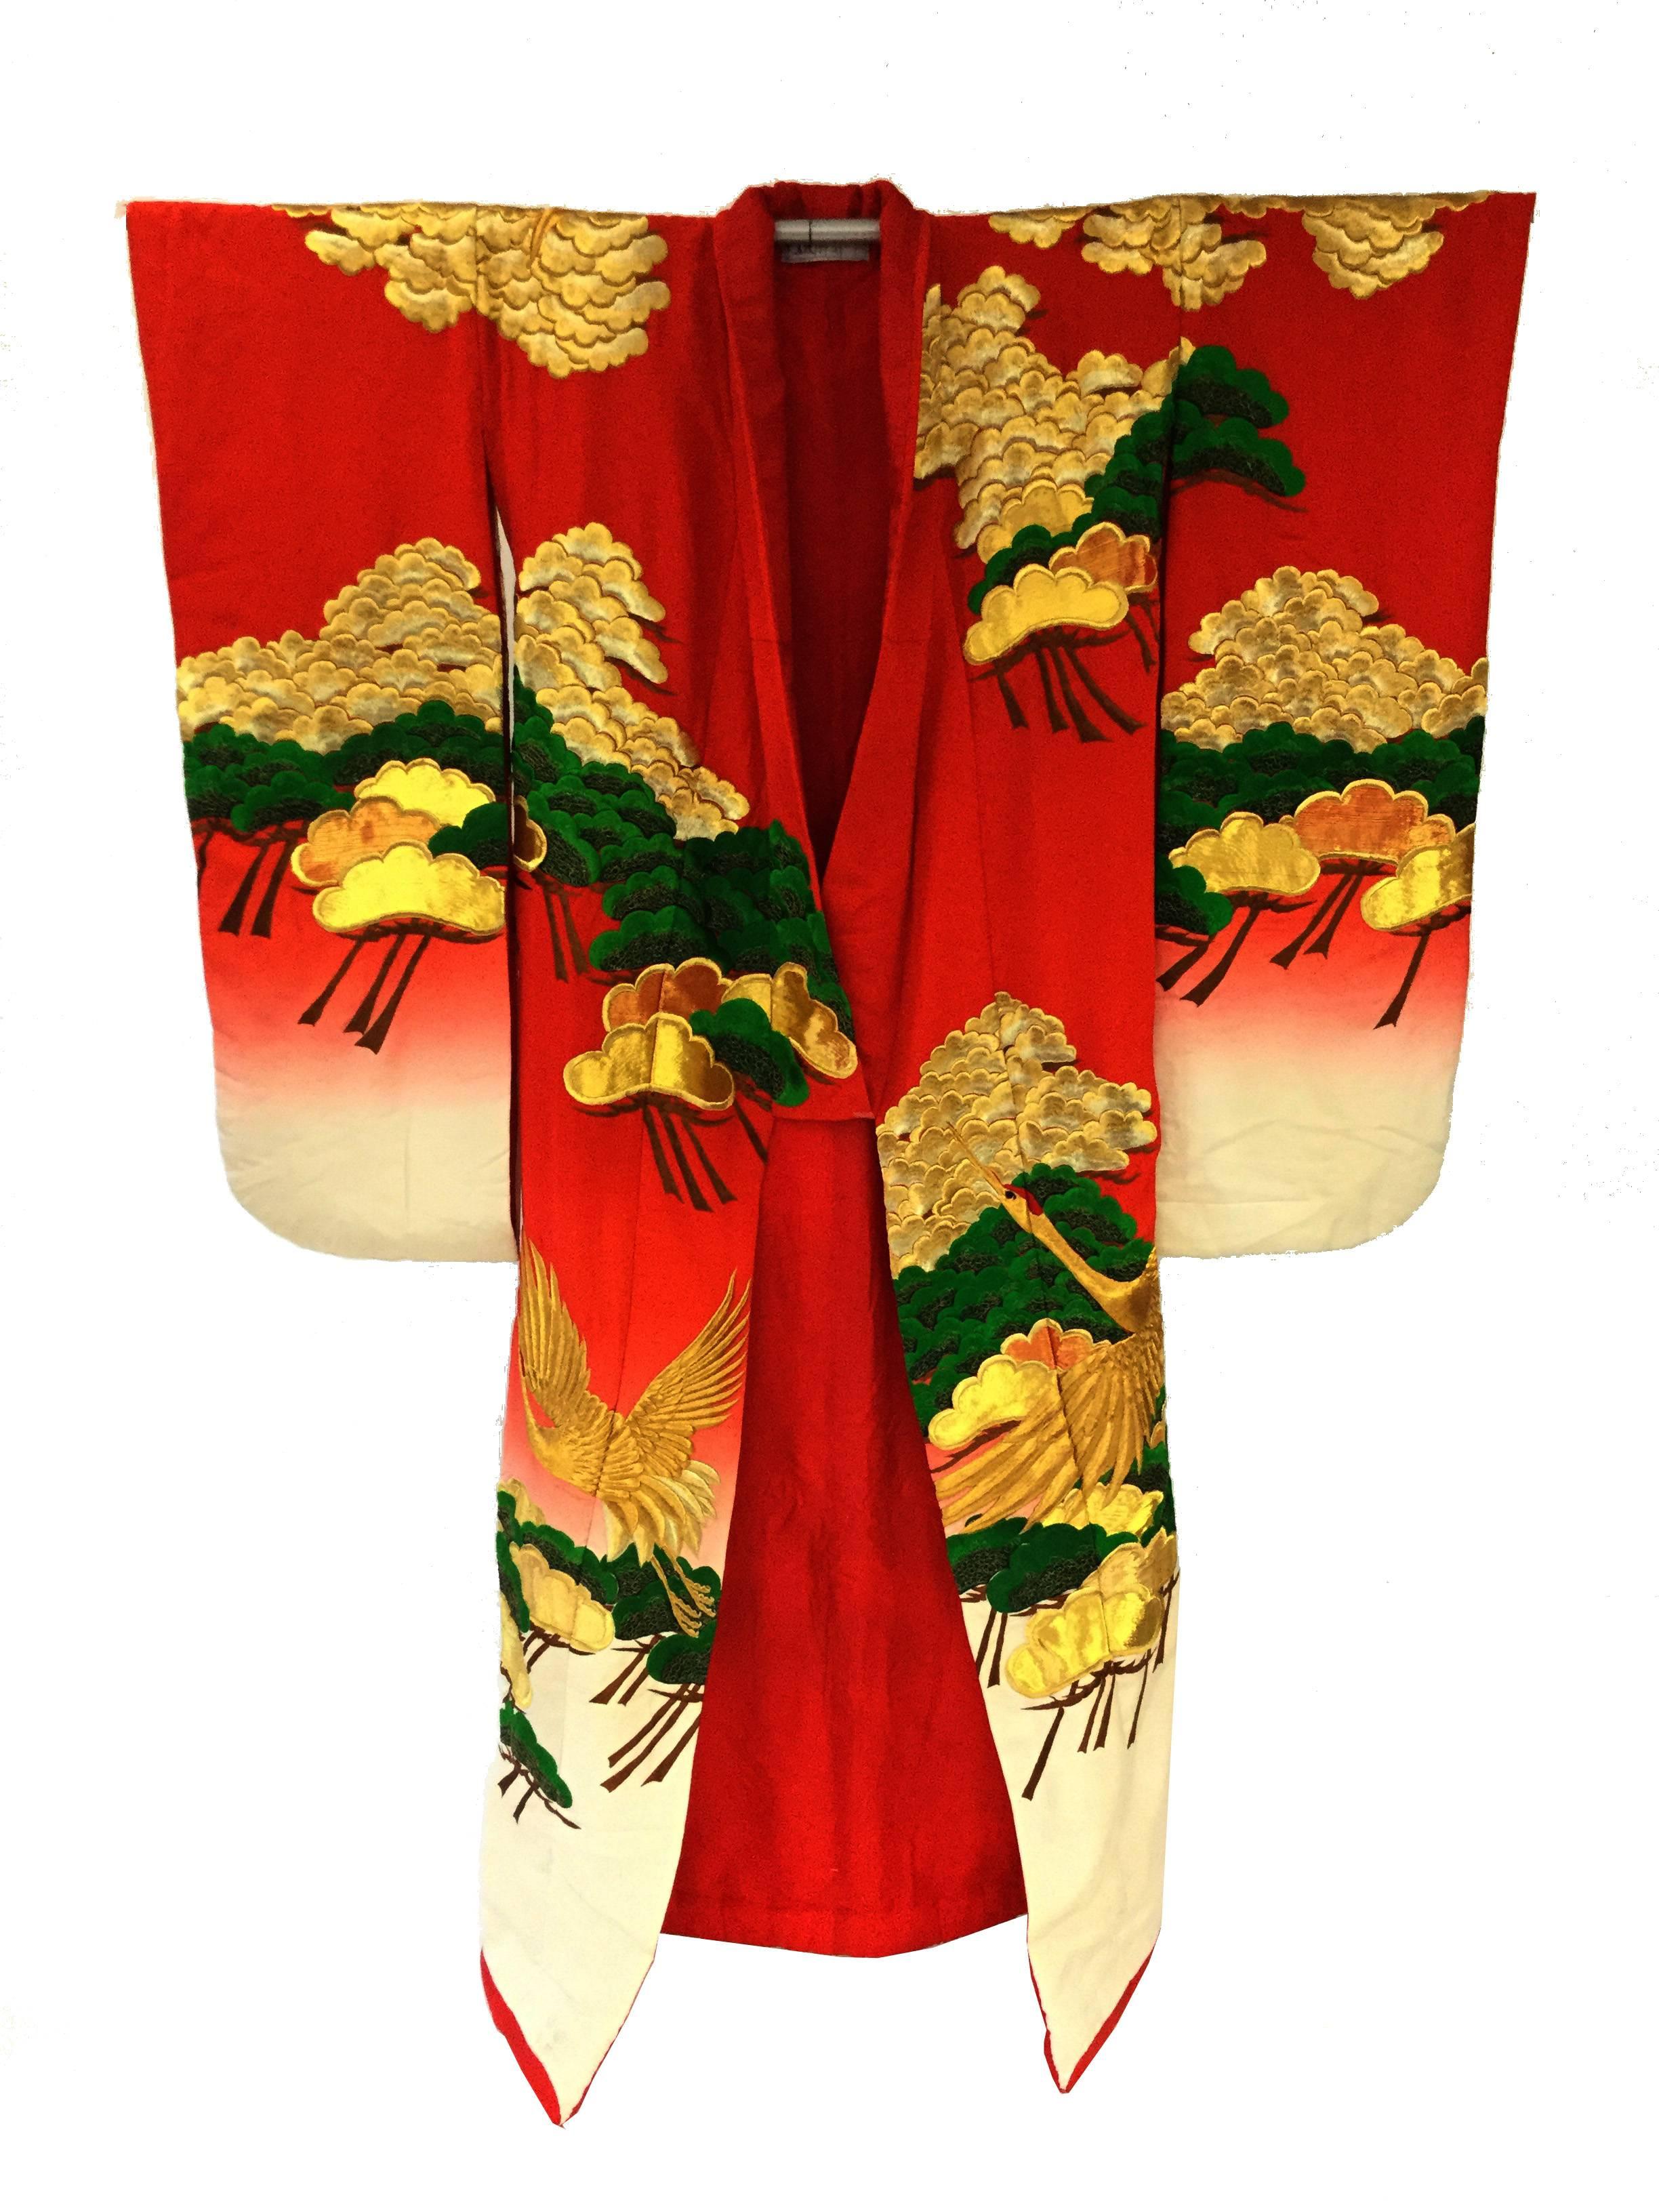 
Absolutely striking! The Uchikake kimono is a formal kimono coat work worn only by brides or by stage performers. We believe this particular piece to be a wedding kimono because of its color and motif. Traditionally, Japanese brides would wear